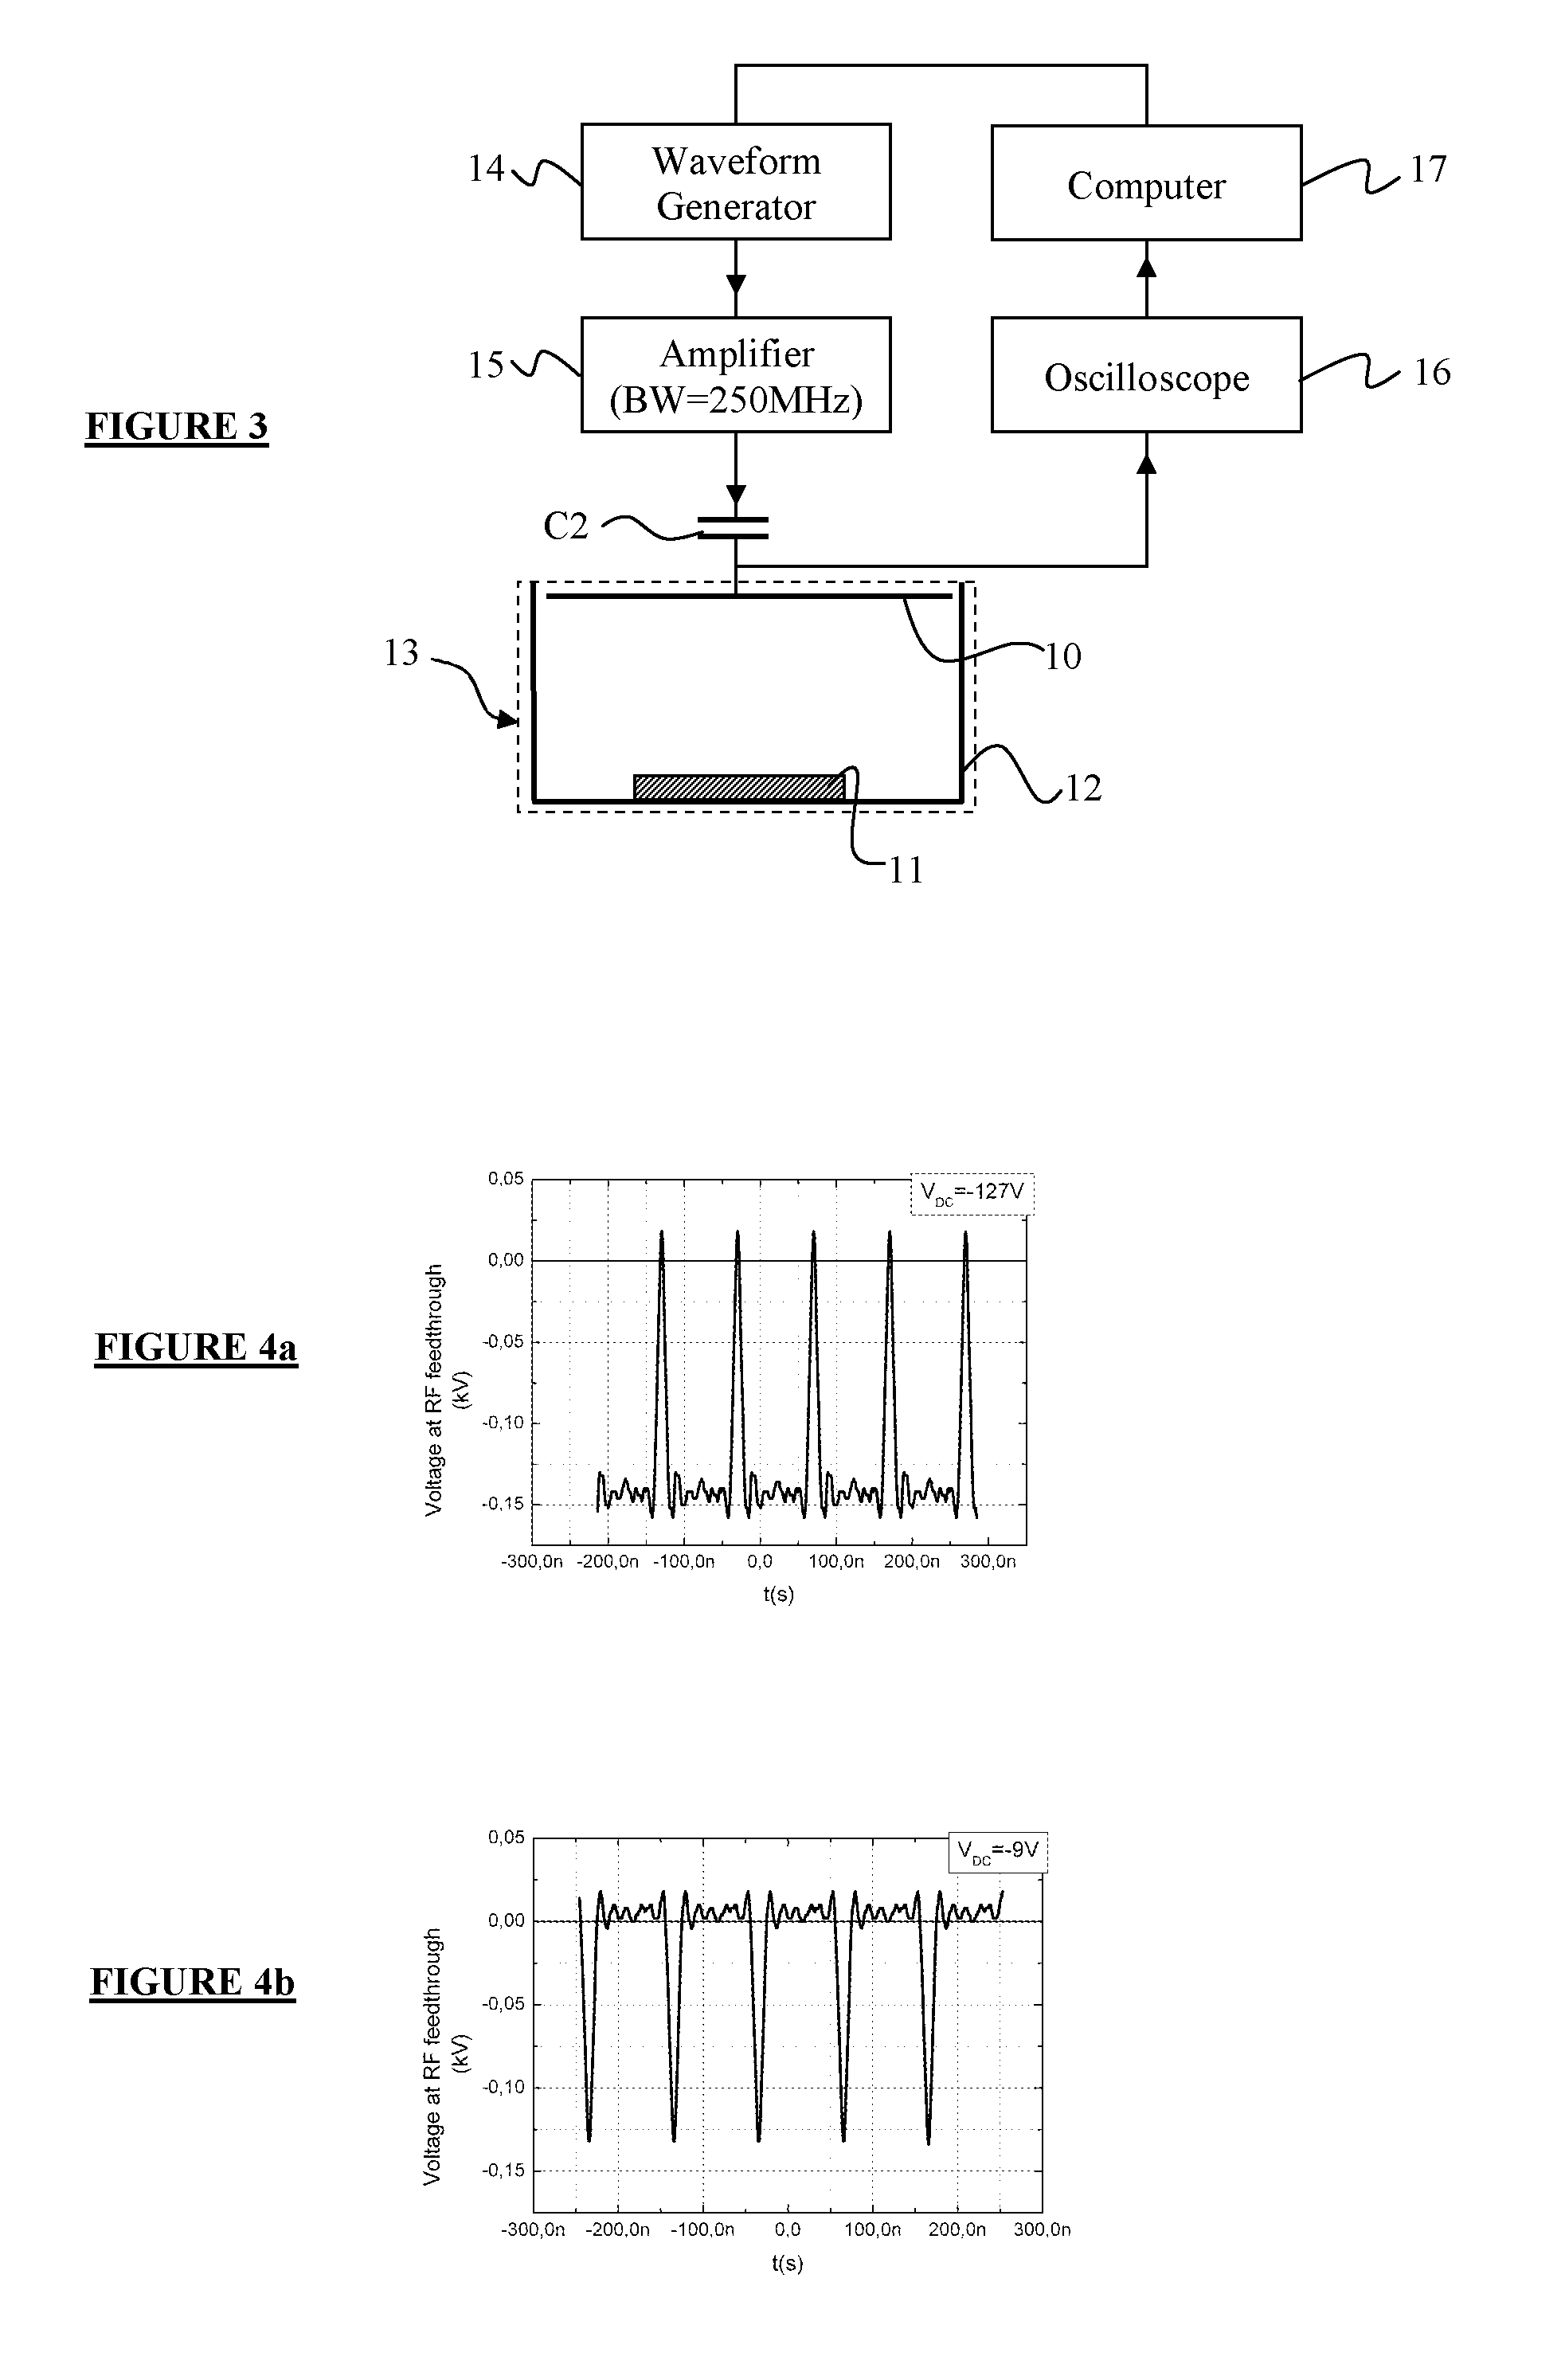 Plasma processing in a capacitively-coupled reactor with trapezoidal-waveform excitation